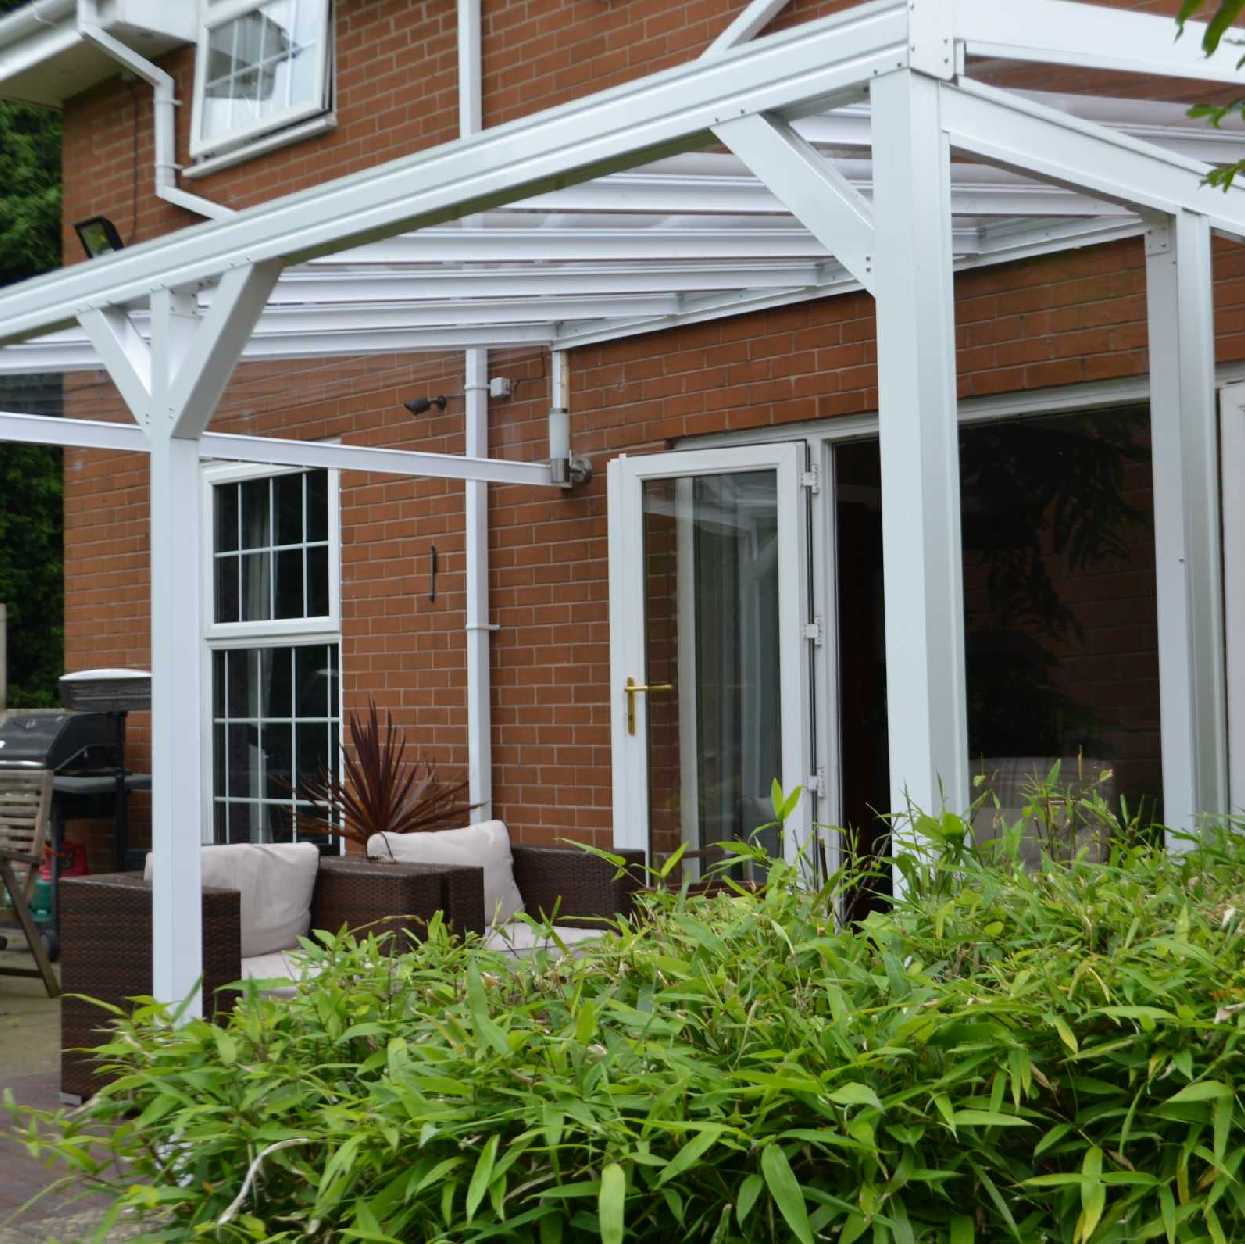 Omega Smart Lean-To Canopy, White with 6mm Glass Clear Plate Polycarbonate Glazing - 4.2m (W) x 2.0m (P), (3) Supporting Posts from Omega Build